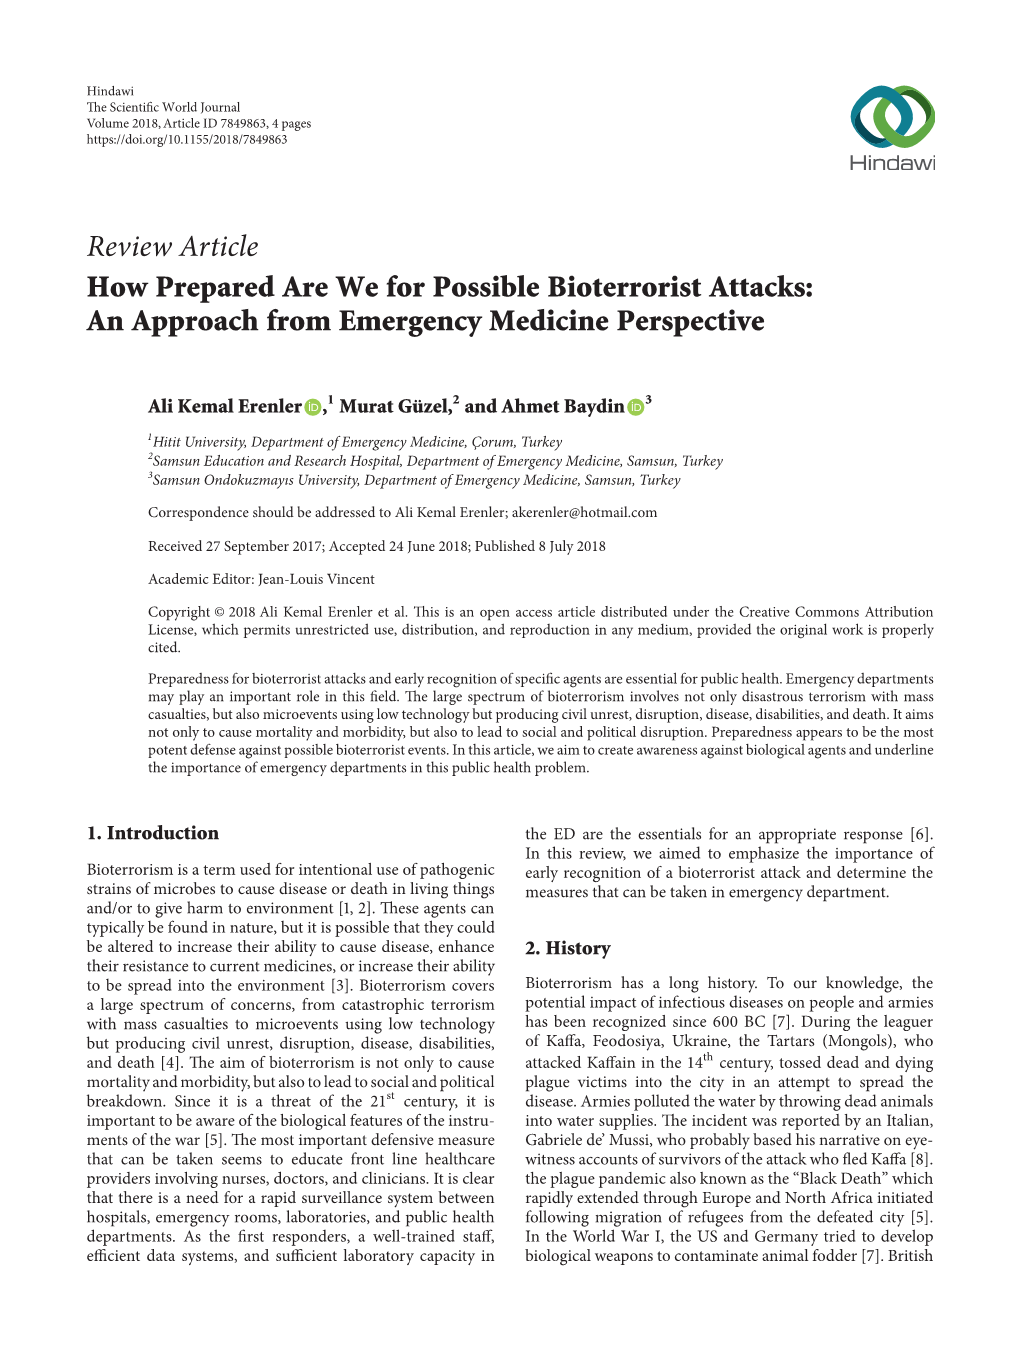 How Prepared Are We for Possible Bioterrorist Attacks: an Approach from Emergency Medicine Perspective